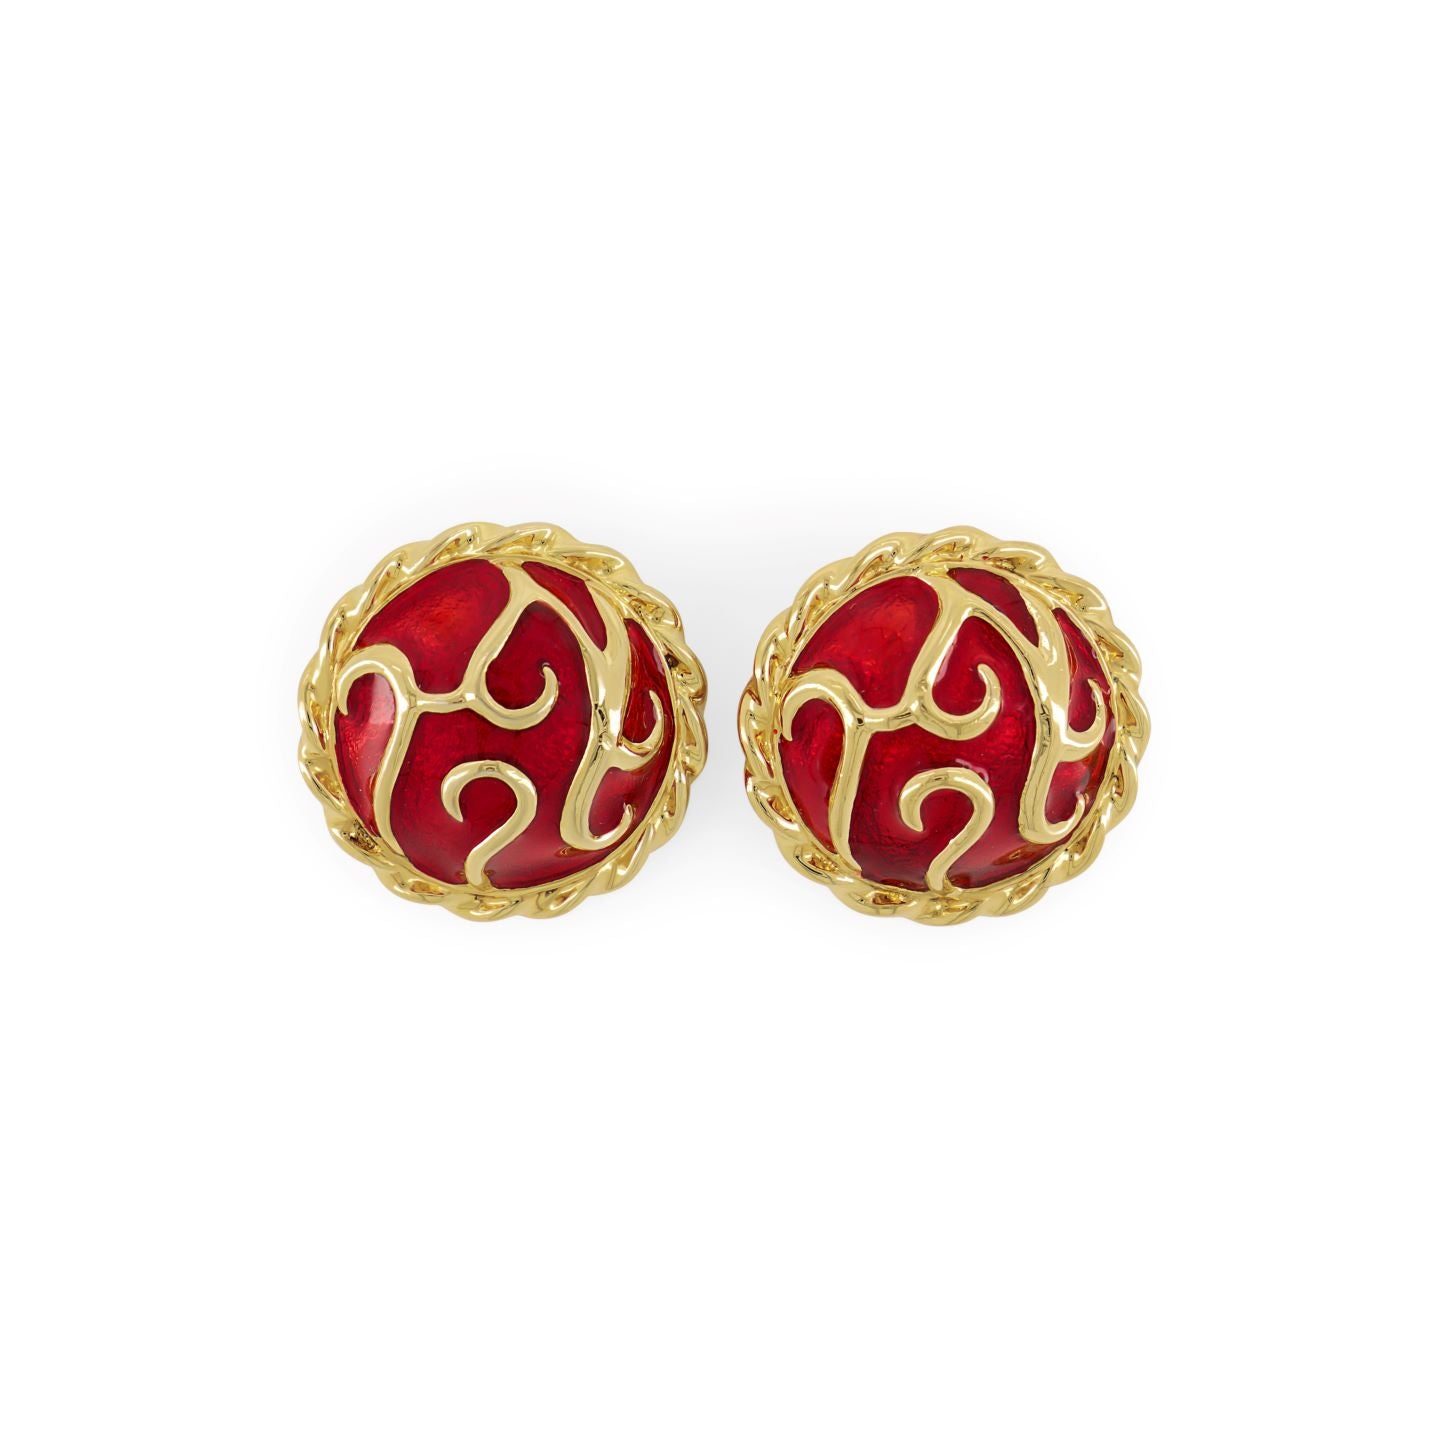 Vintage costume clip earrings in gold-plated metal and red enamel